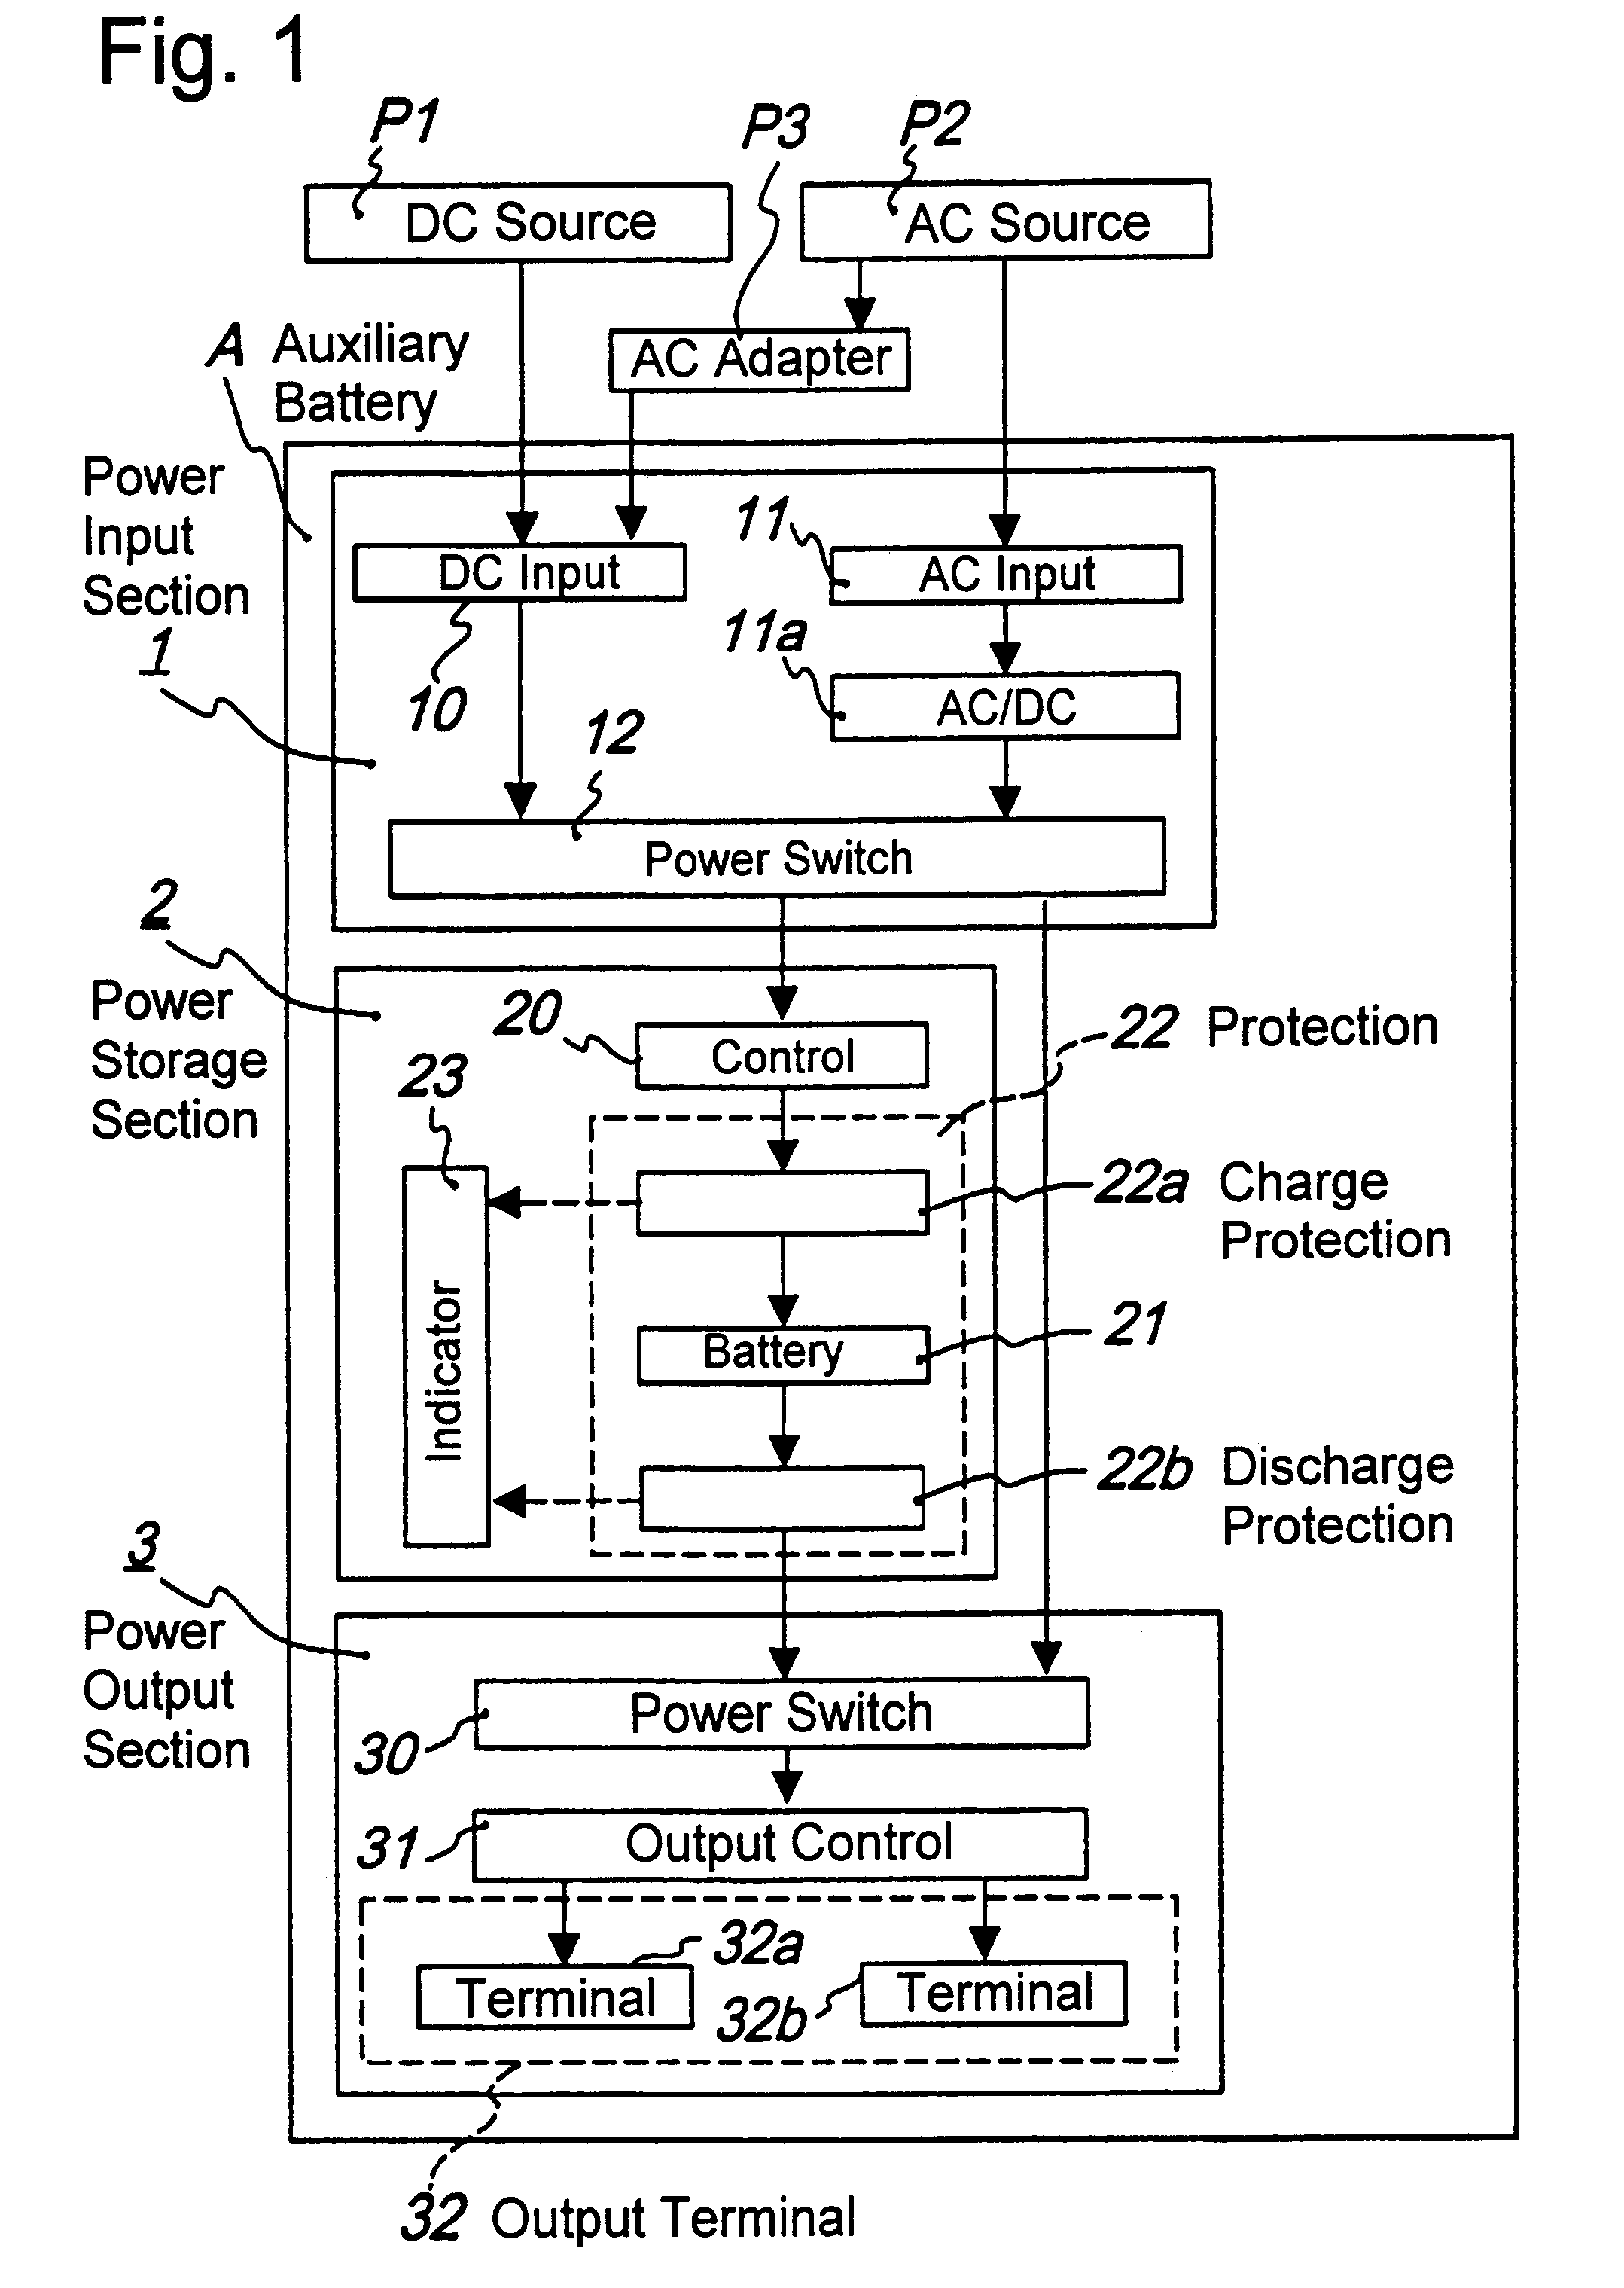 Auxiliary battery for portable devices